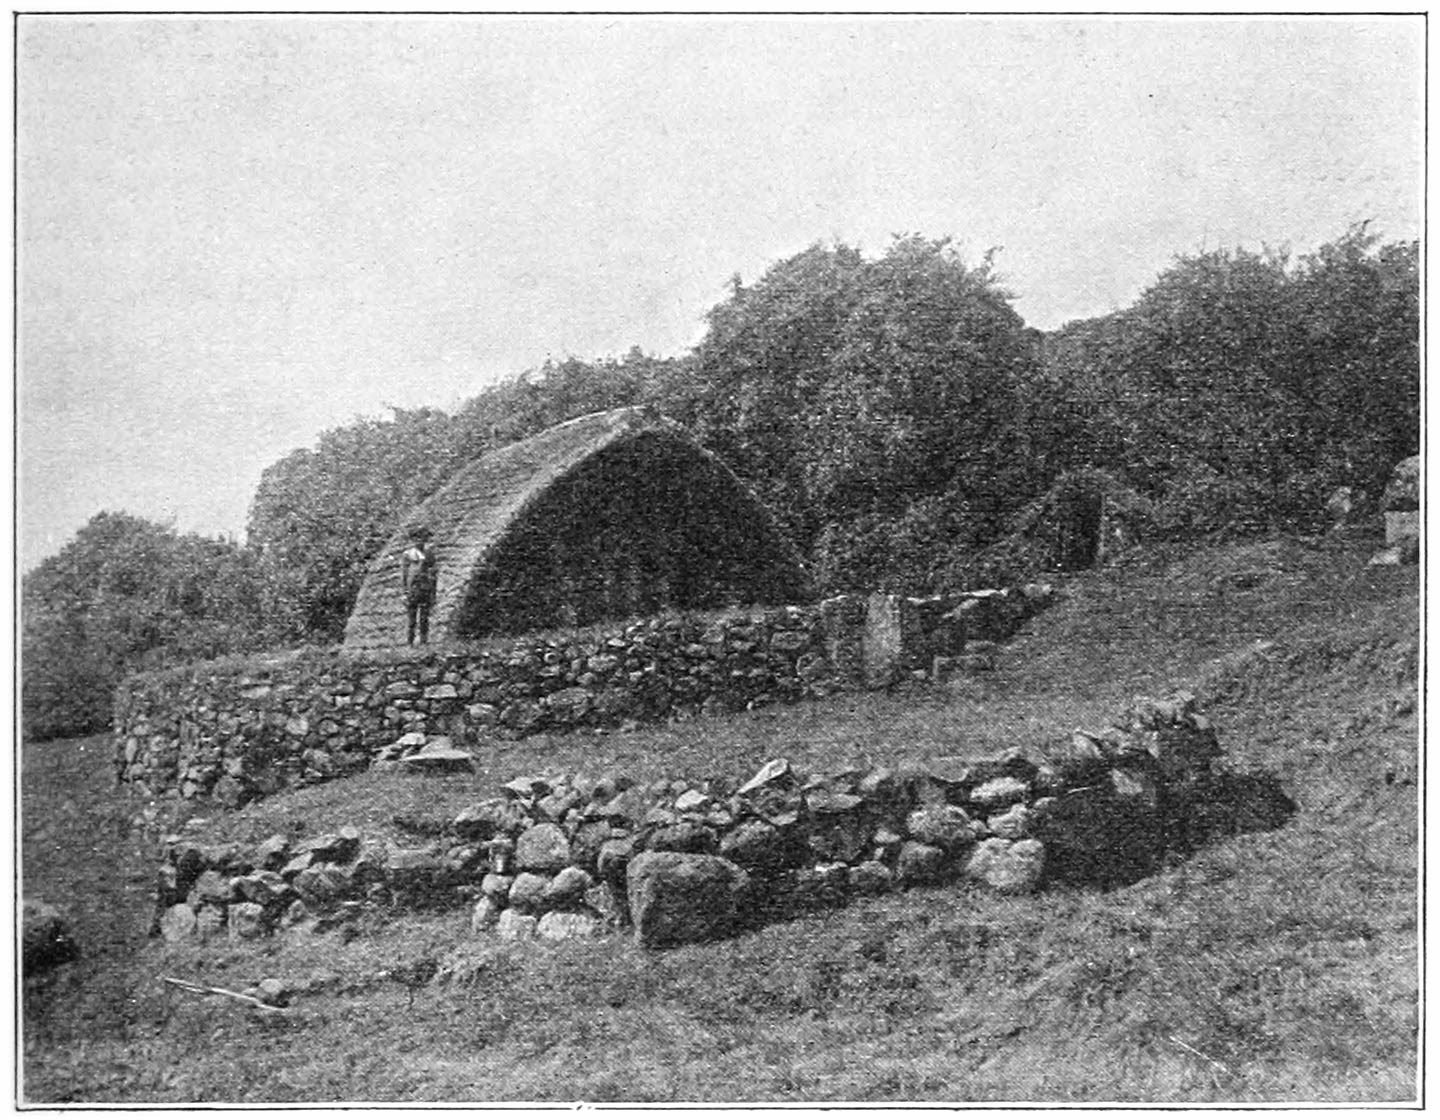 FIG. 21.—THE ‘KUDRPALI’ OF KARS, WITH THE ‘KUDRPALIKARTMOKH’ STANDING ON THE WALL. IN THE FOREGROUND IS THE MOUND CALLED ‘IMUDRIKARS’ IN THE BACKGROUND ON THE RIGHT IS THE CALF-HOUSE.